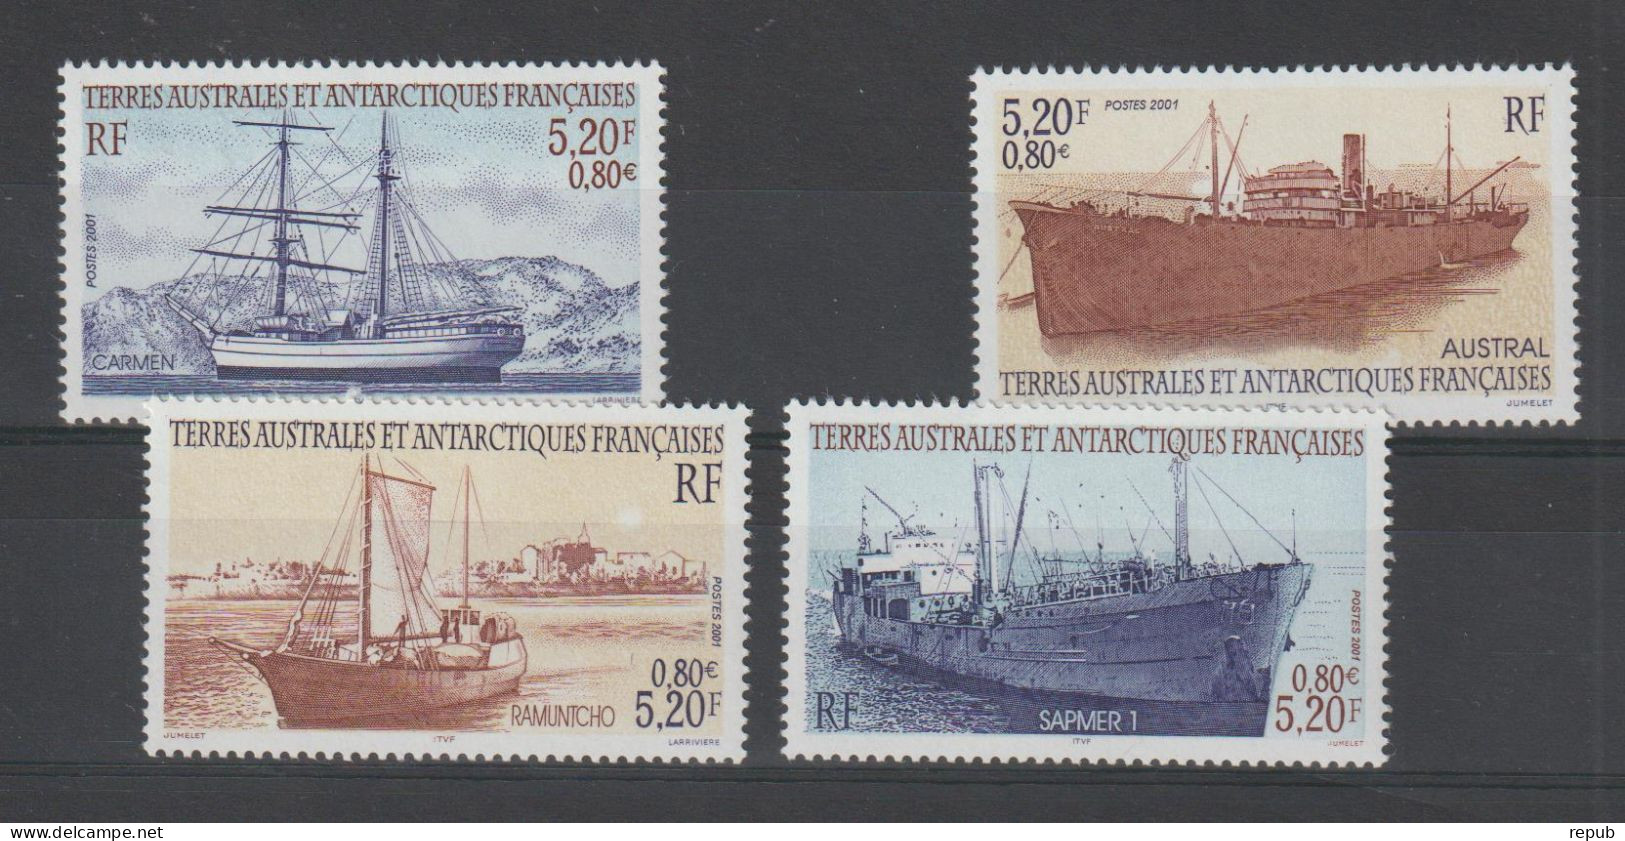 TAAF 2001 Timbres Issus Du BF 6, 302-306, 4 Val ** MNH - Ongebruikt